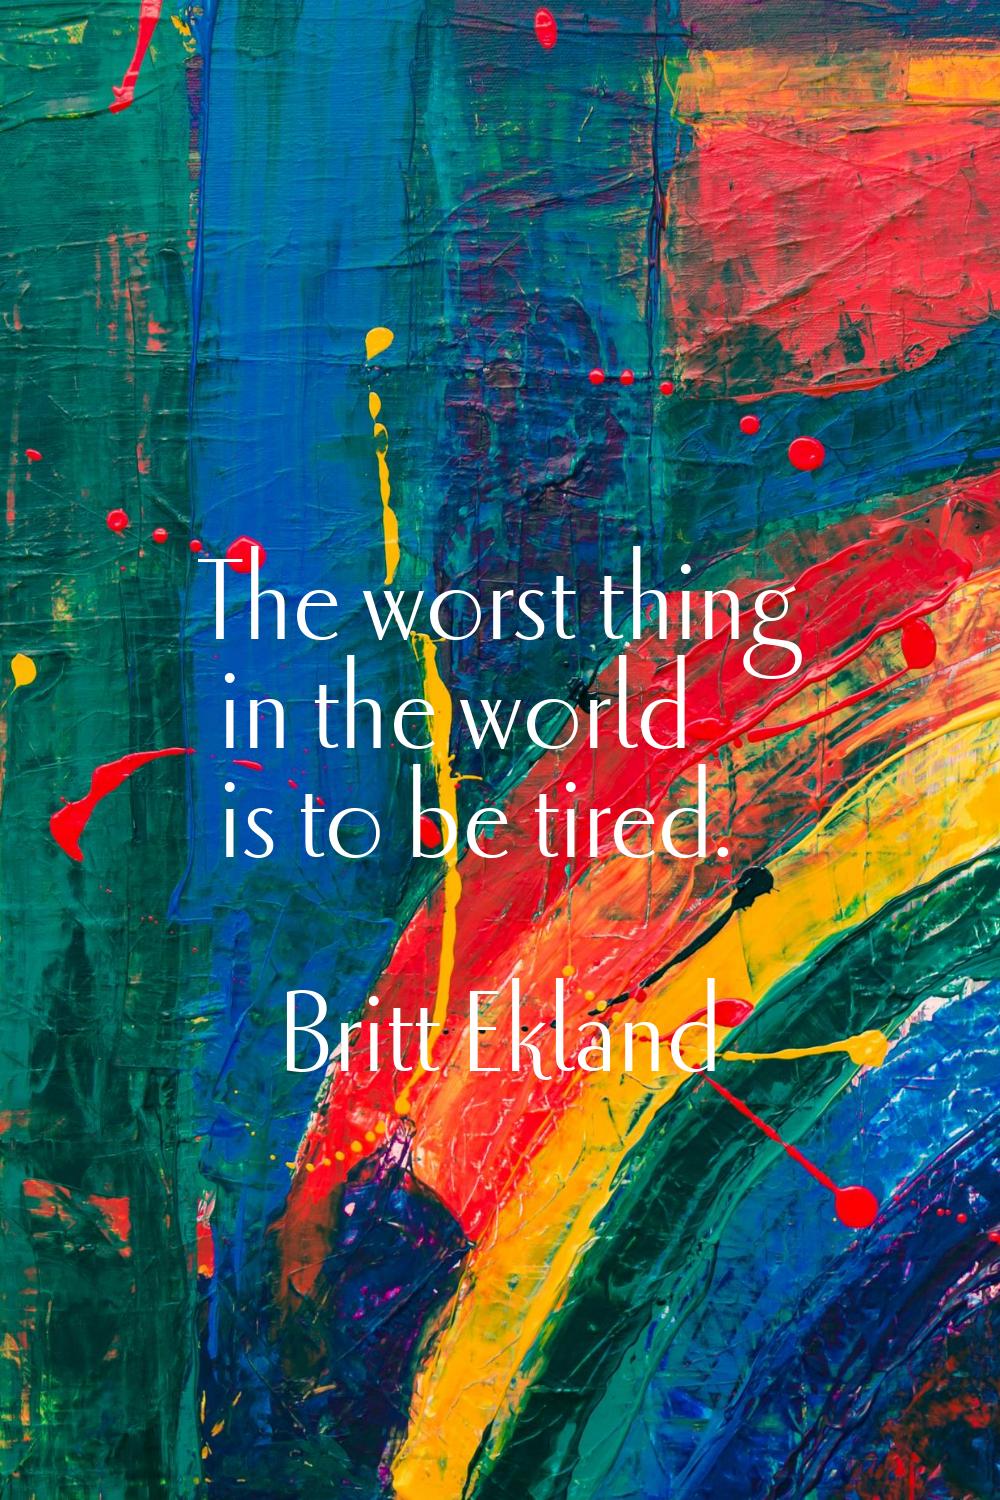 The worst thing in the world is to be tired.